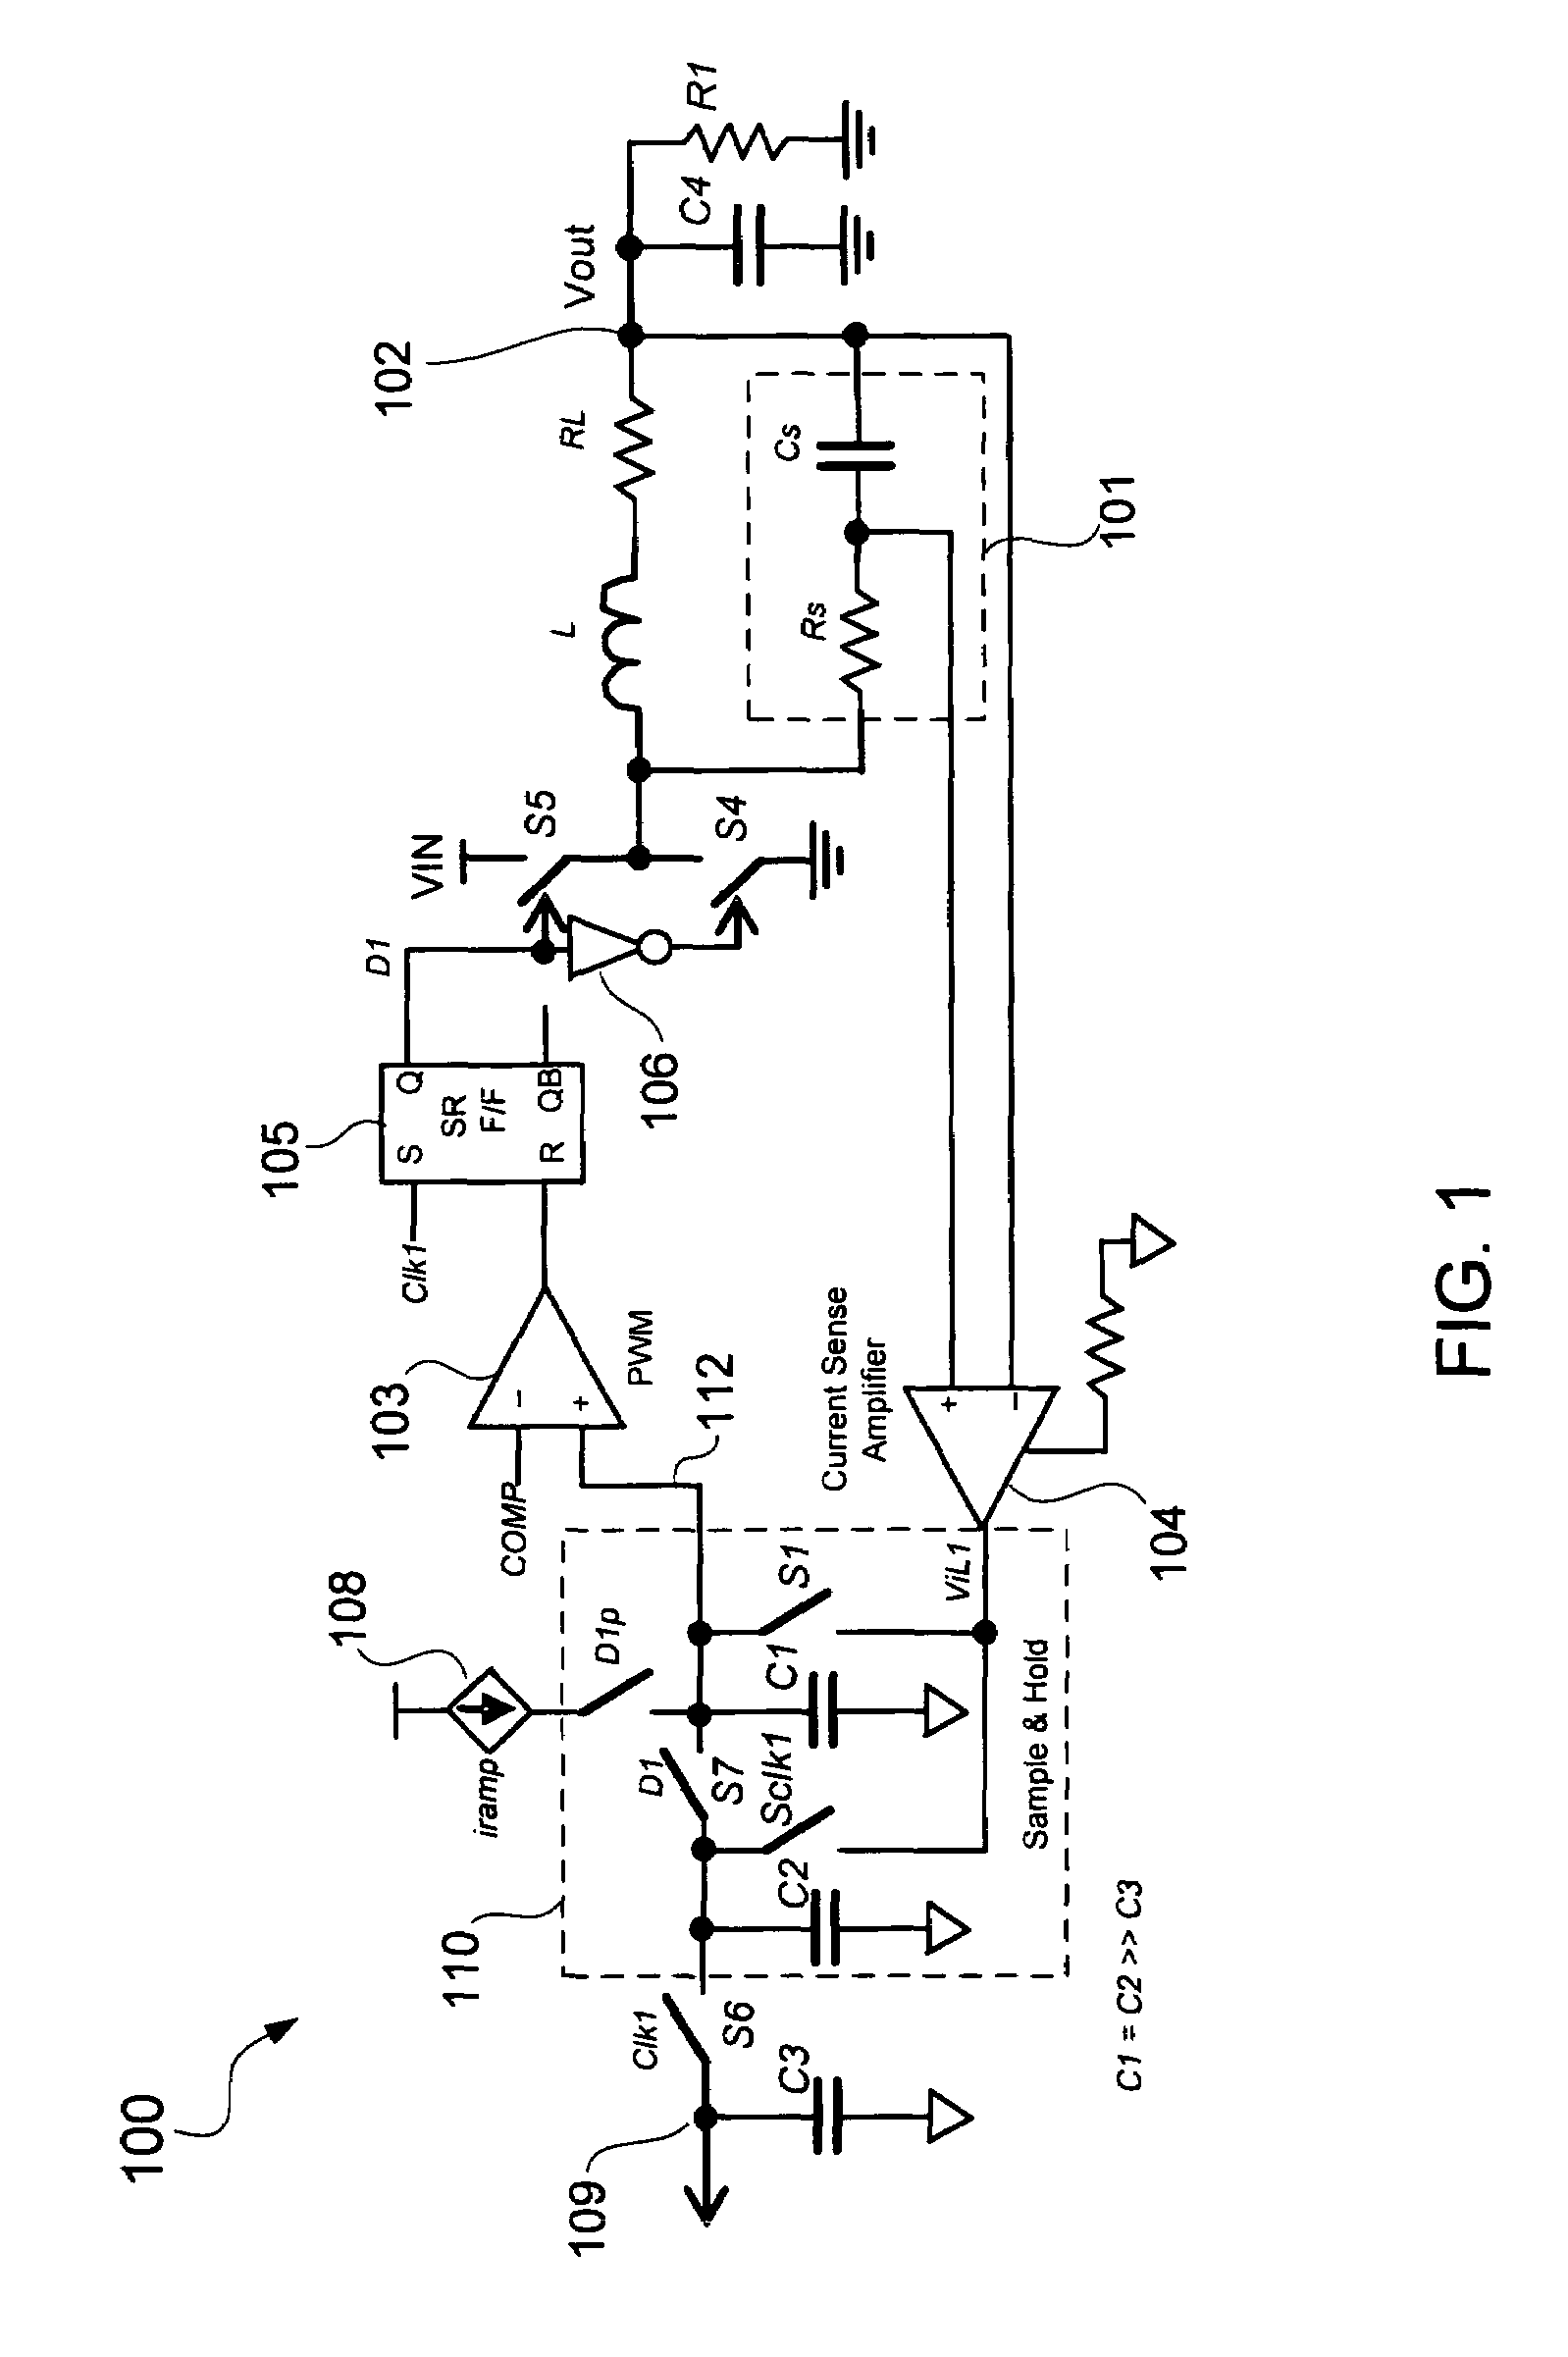 Sample and hold technique for generating an average of sensed inductor current in voltage regulators